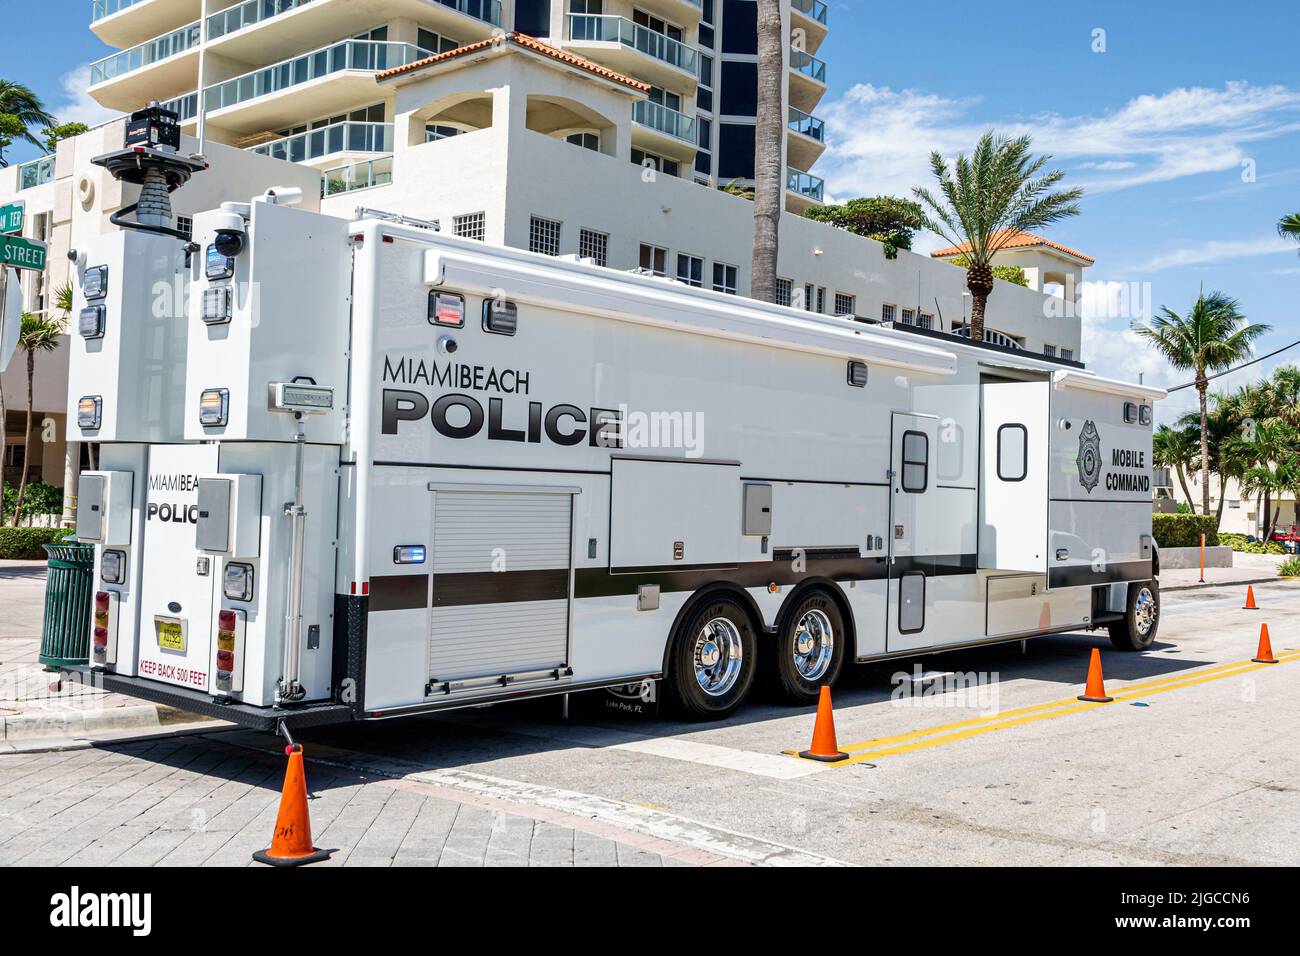 Miami Beach Florida,Ocean Terrace Fire on the Fourth 4th of July Festival event celebration,police mobile command station Stock Photo